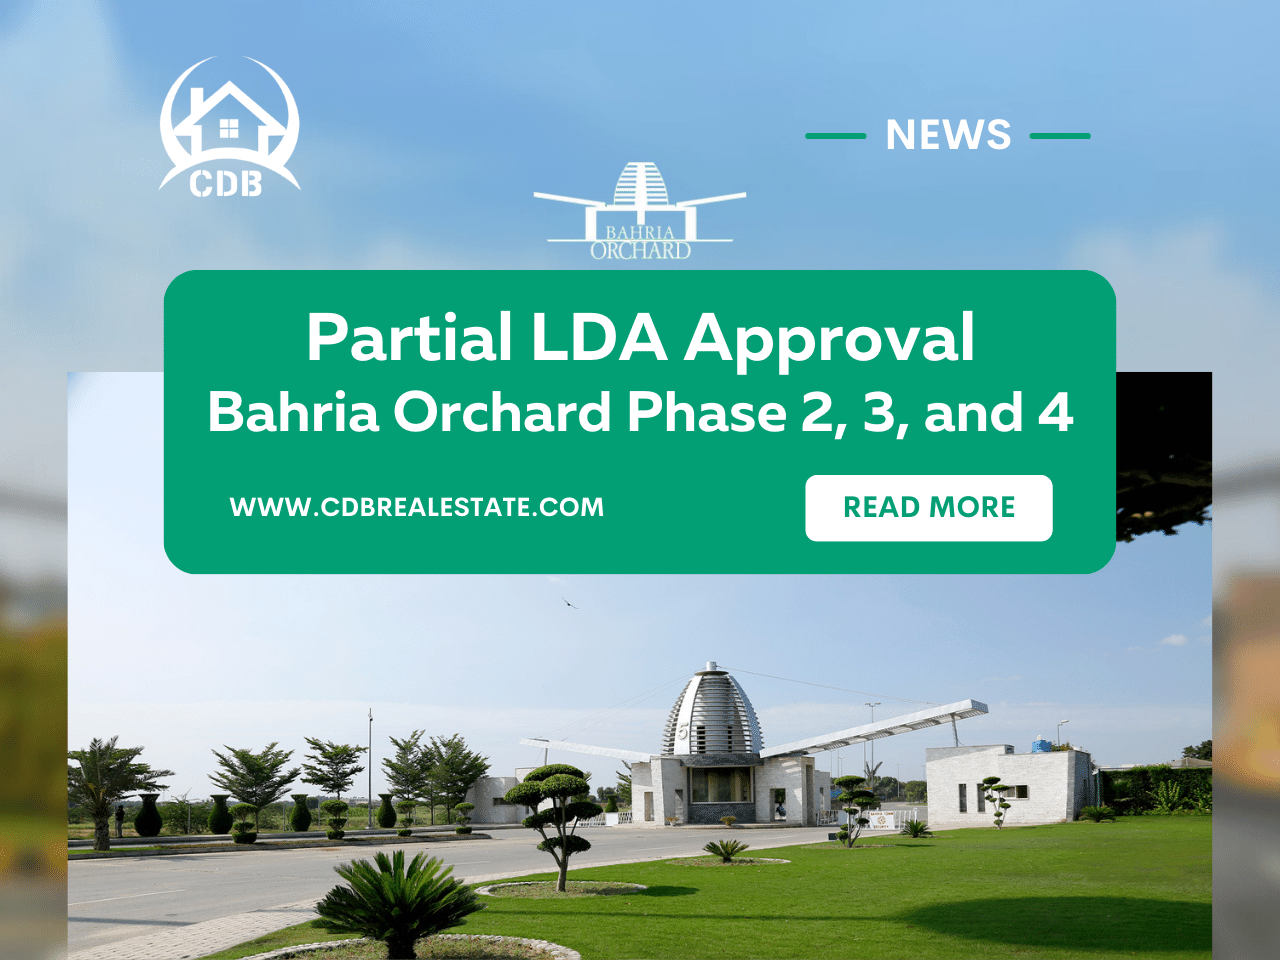 Partial LDA Approval for Bahria Orchard Phase 2, 3, and 4